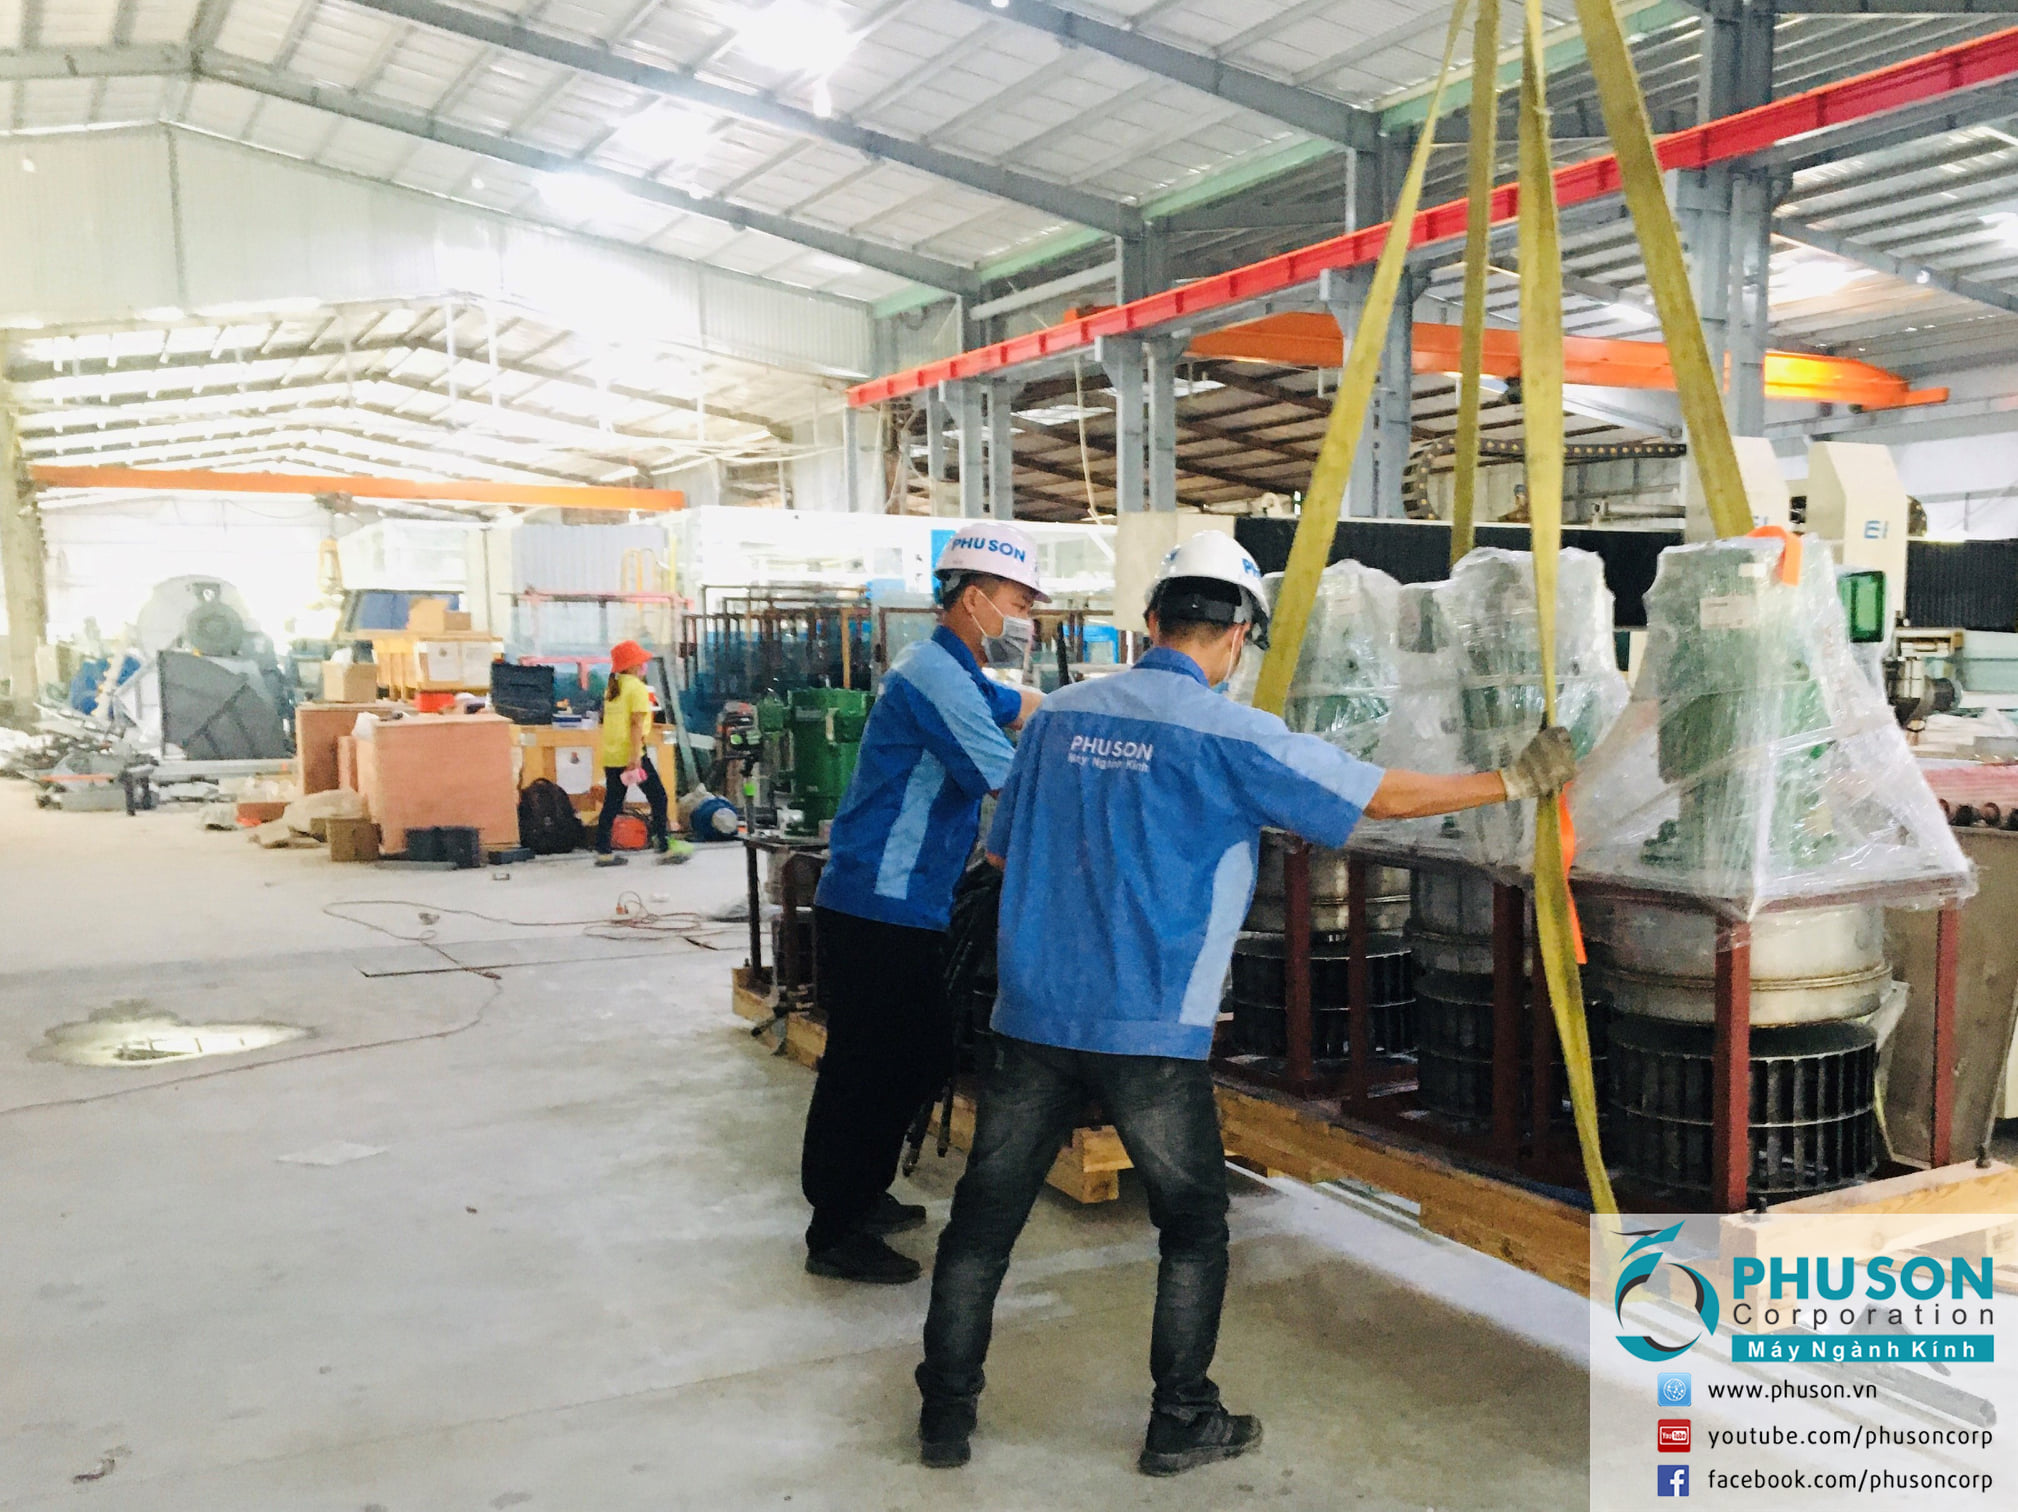 Complete the installation of the LANDGLASS automatic tempered glass production line and transfer it to BAO TRAN GLASS factory before the Lunar New Year